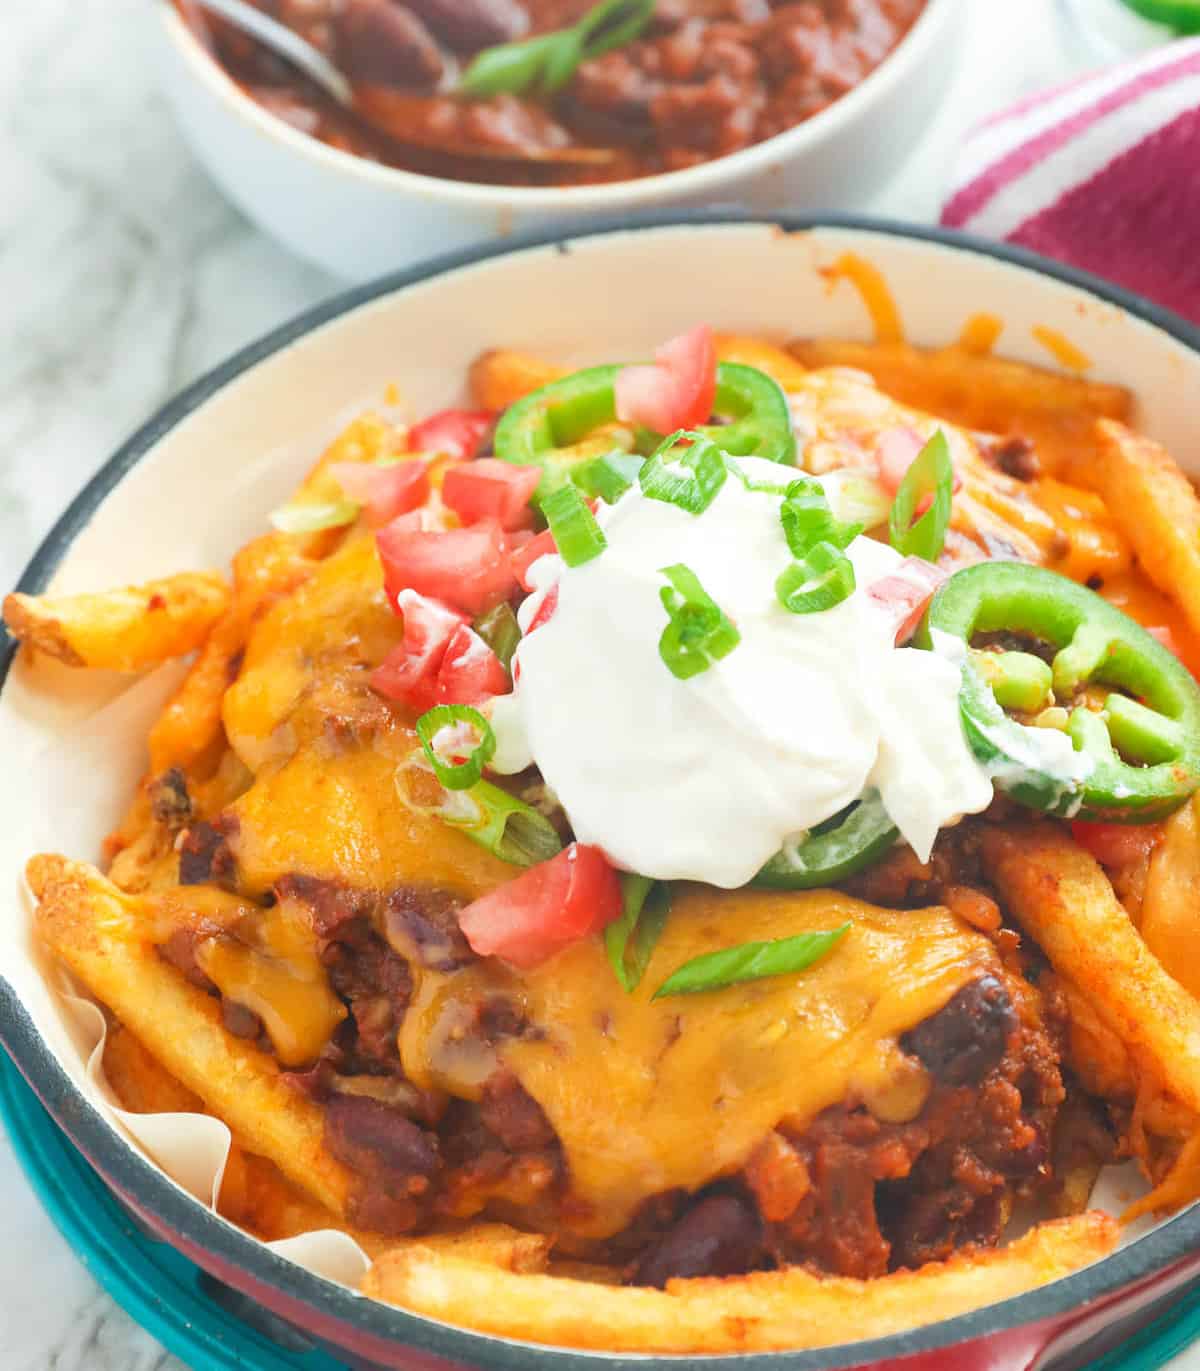 Chili cheese fries topped with sour cream, diced tomatoes, and jalapenos